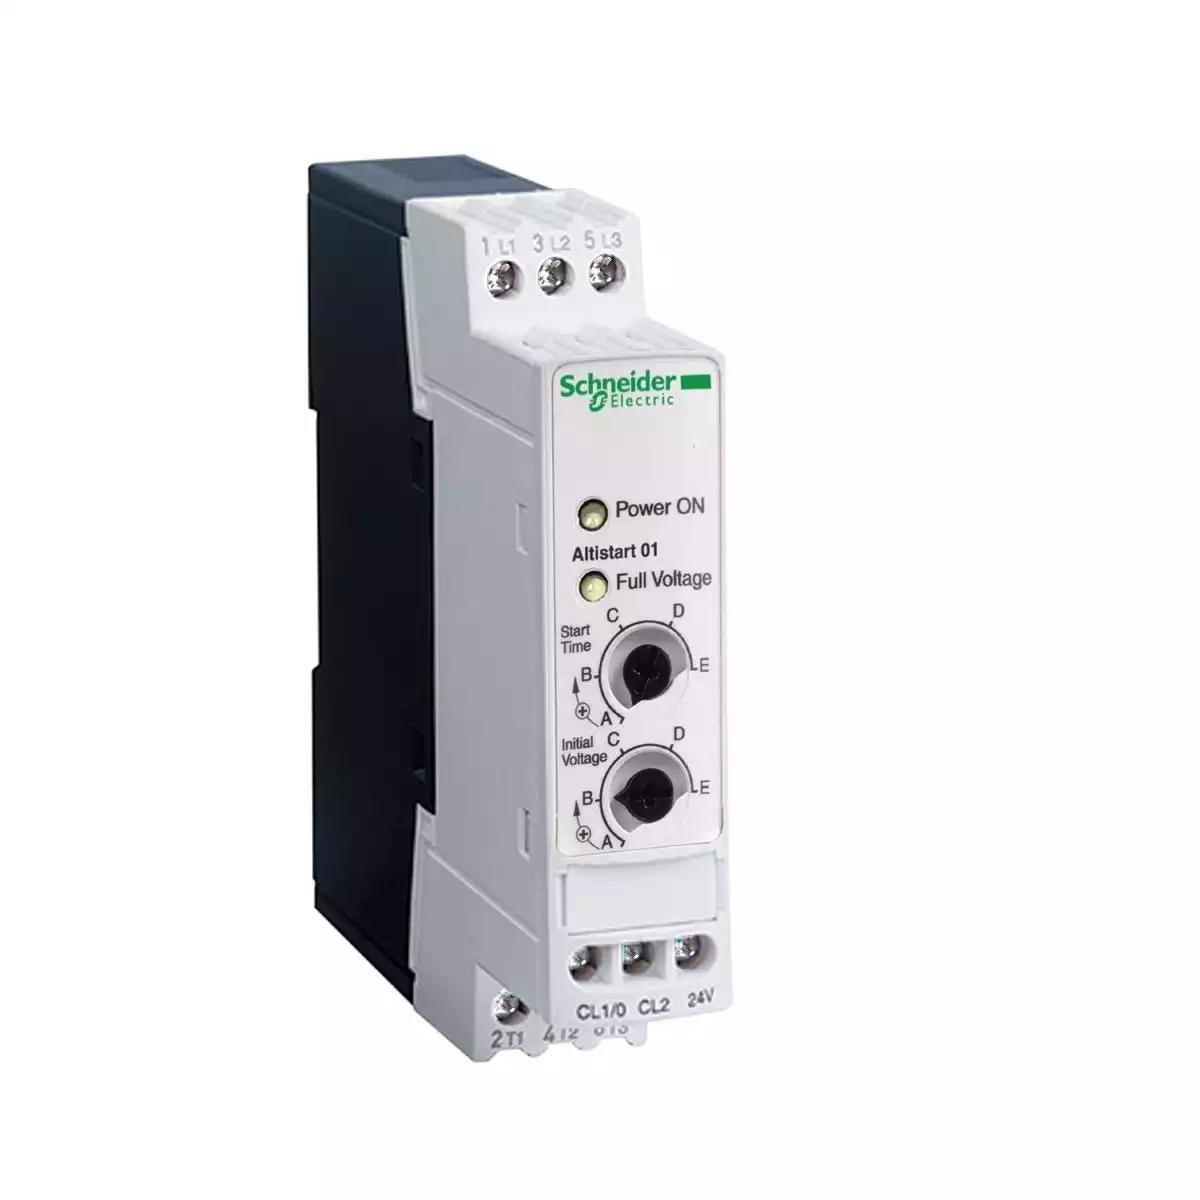 Schneider Electric soft starter for asynchronous motor - ATS01 - 6 A - 110..480V - 0.75..3 KW